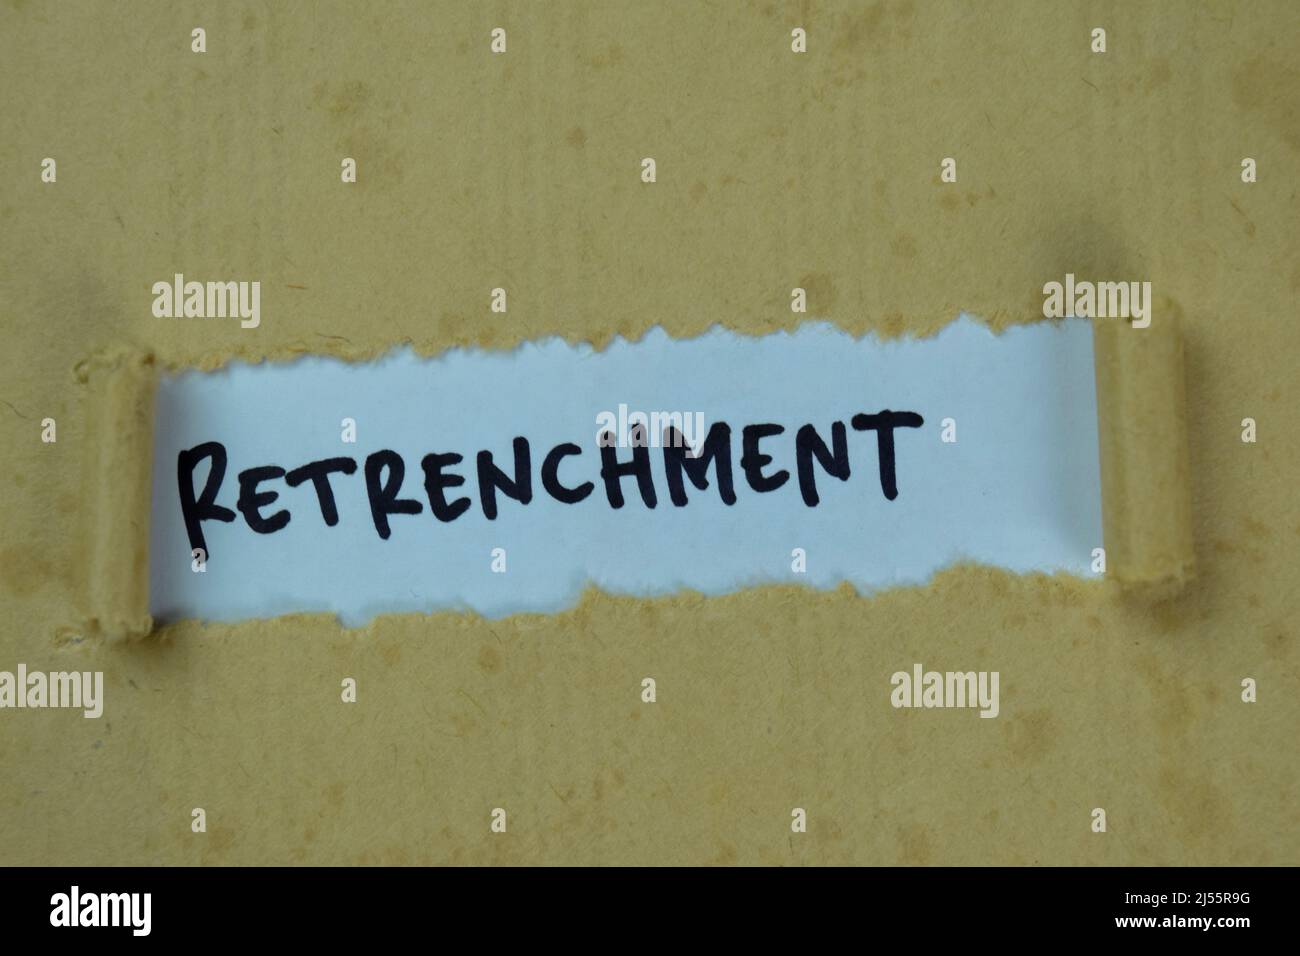 Retrenchment Text written in torn paper Stock Photo